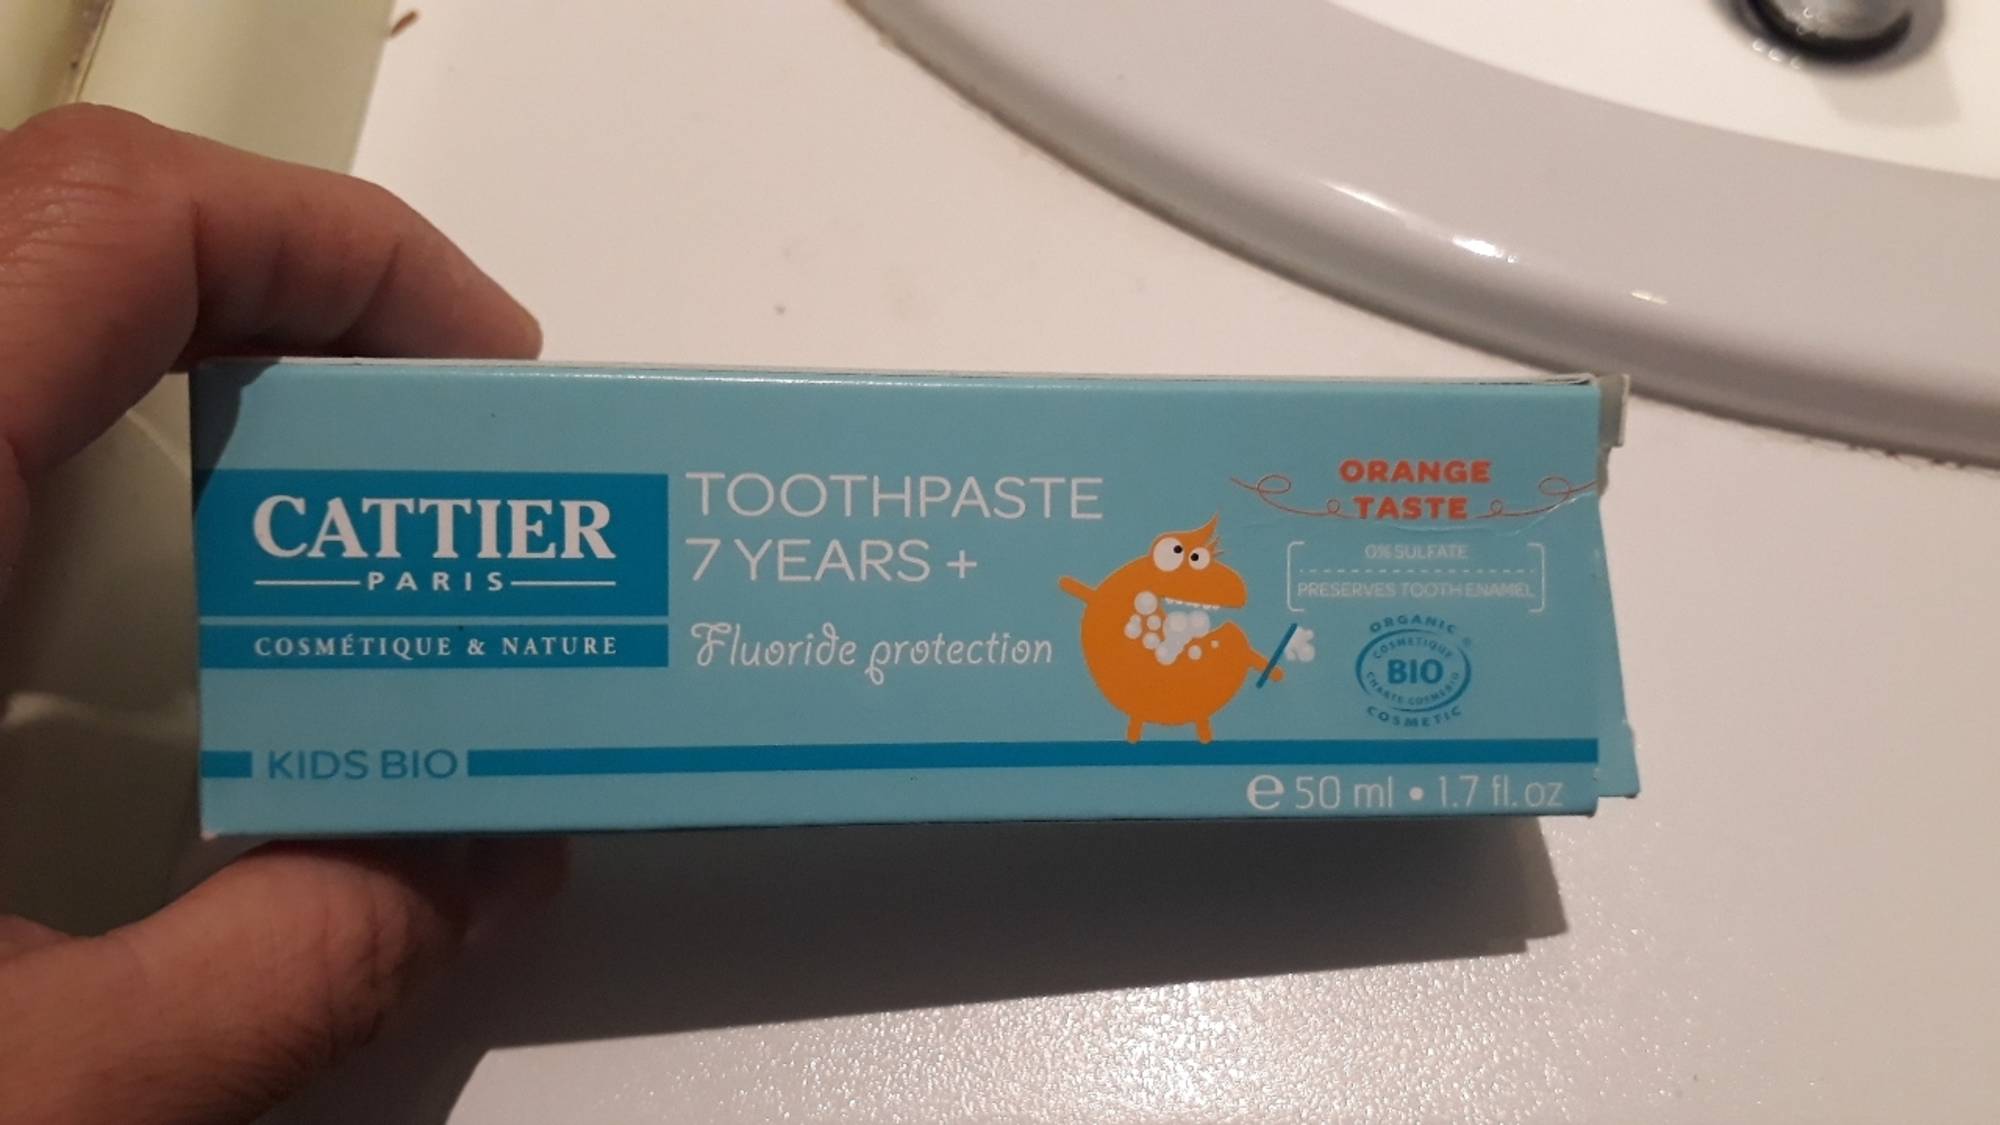 CATTIER - Toothpaste 7 years + fluoride protection